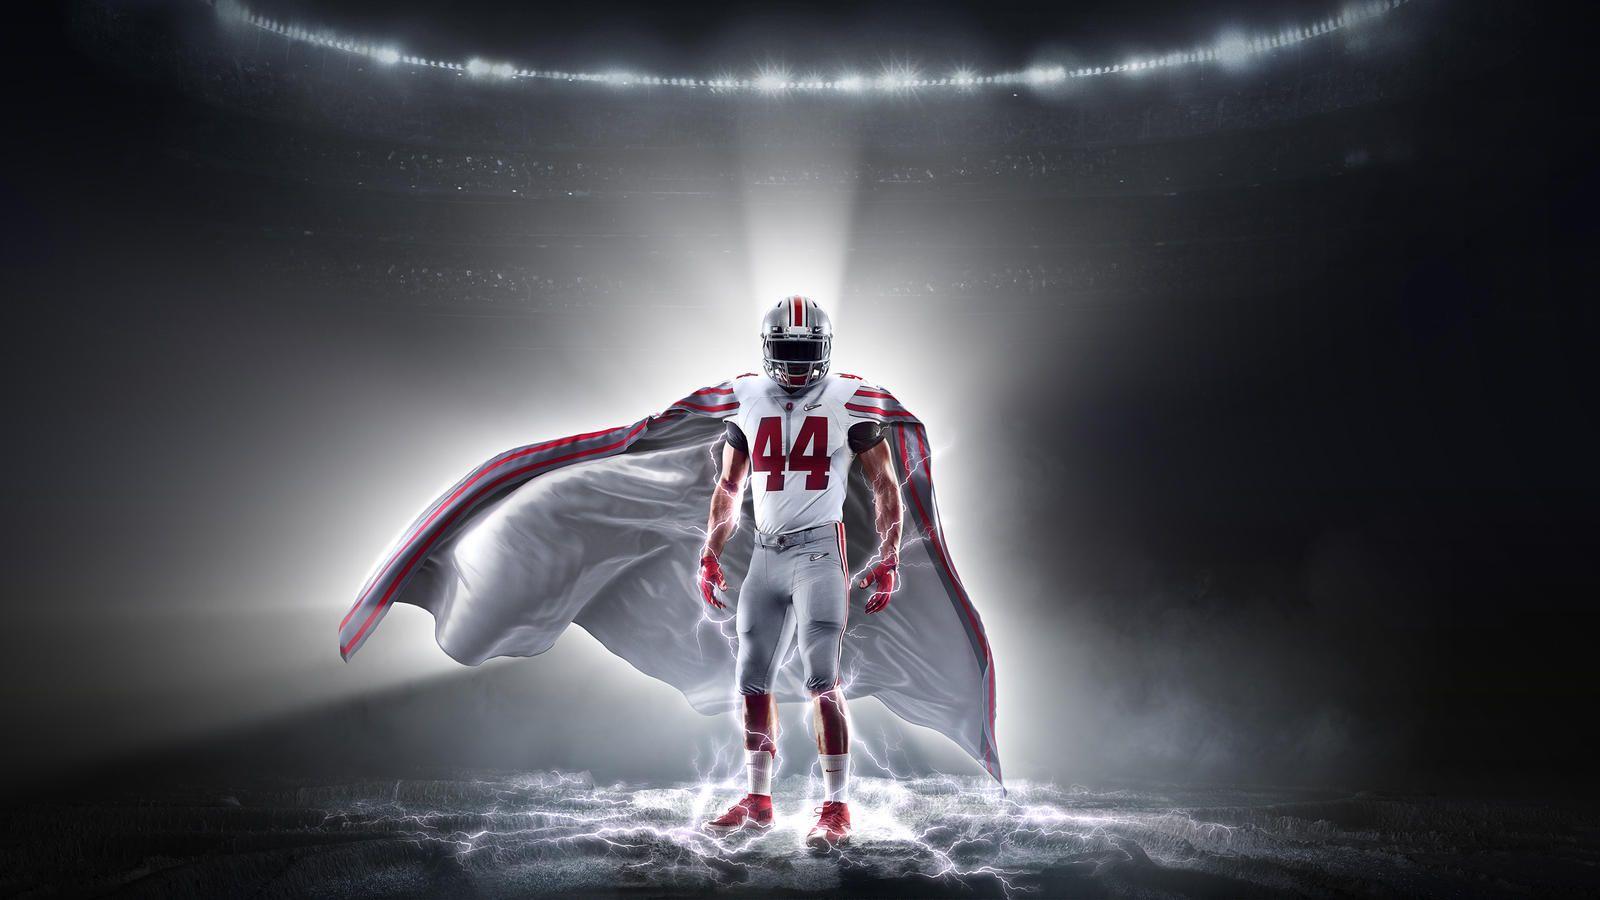 Four Nike Sponsored Teams Battle For College Football Playoff